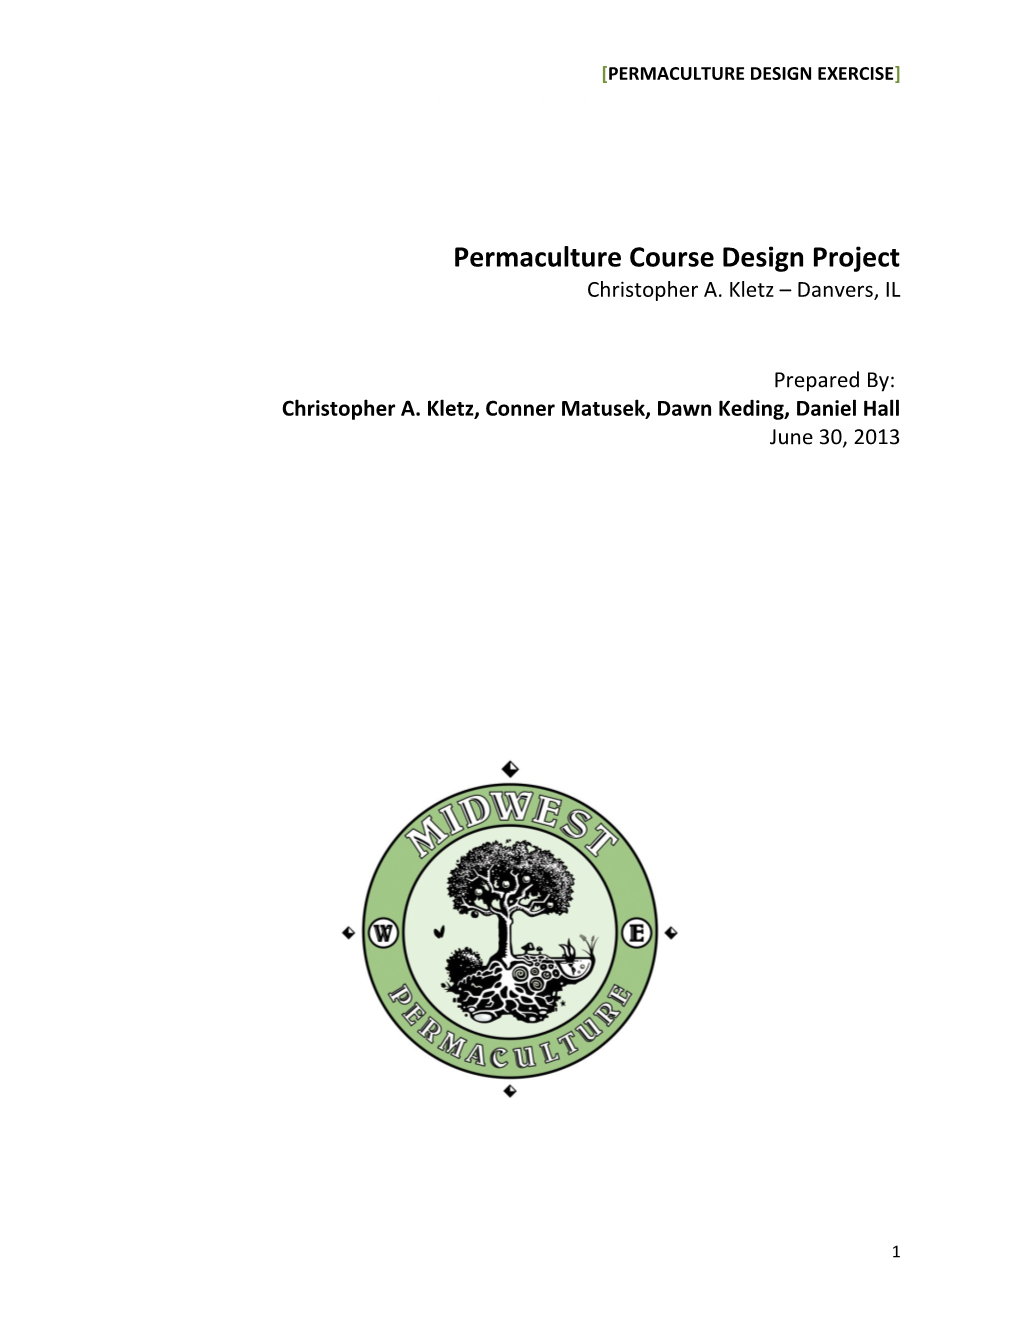 Permaculture Design Exercise